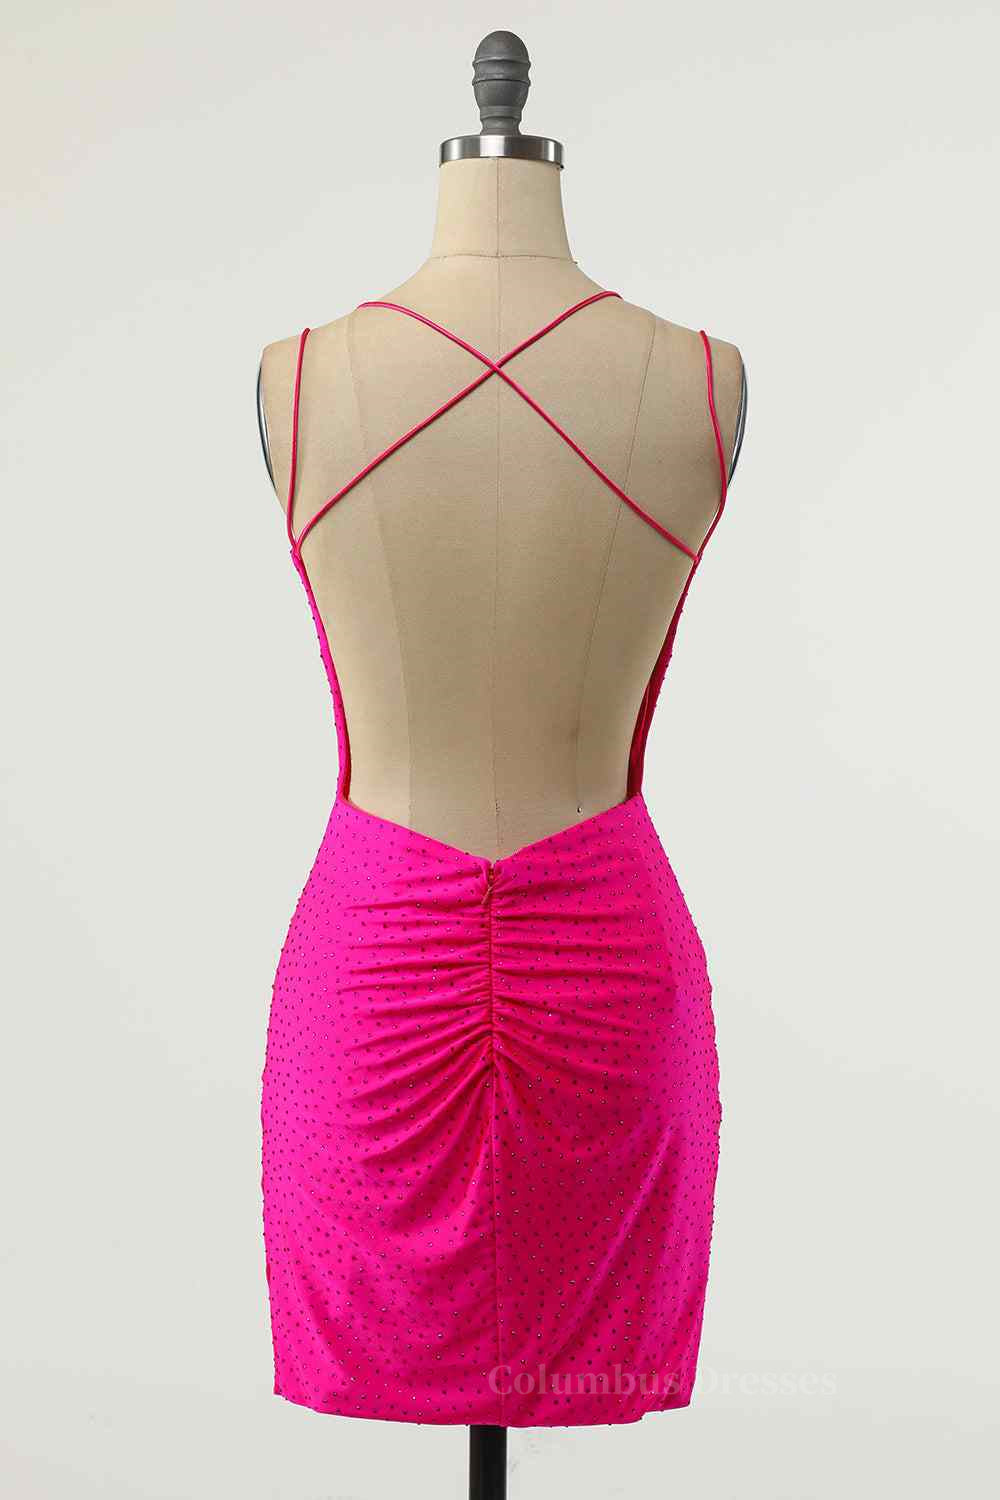 Party Dresses Jumpsuits, Fuchsia Sheath Double Straps Crossed Back Beaded Mini Homecoming Dress